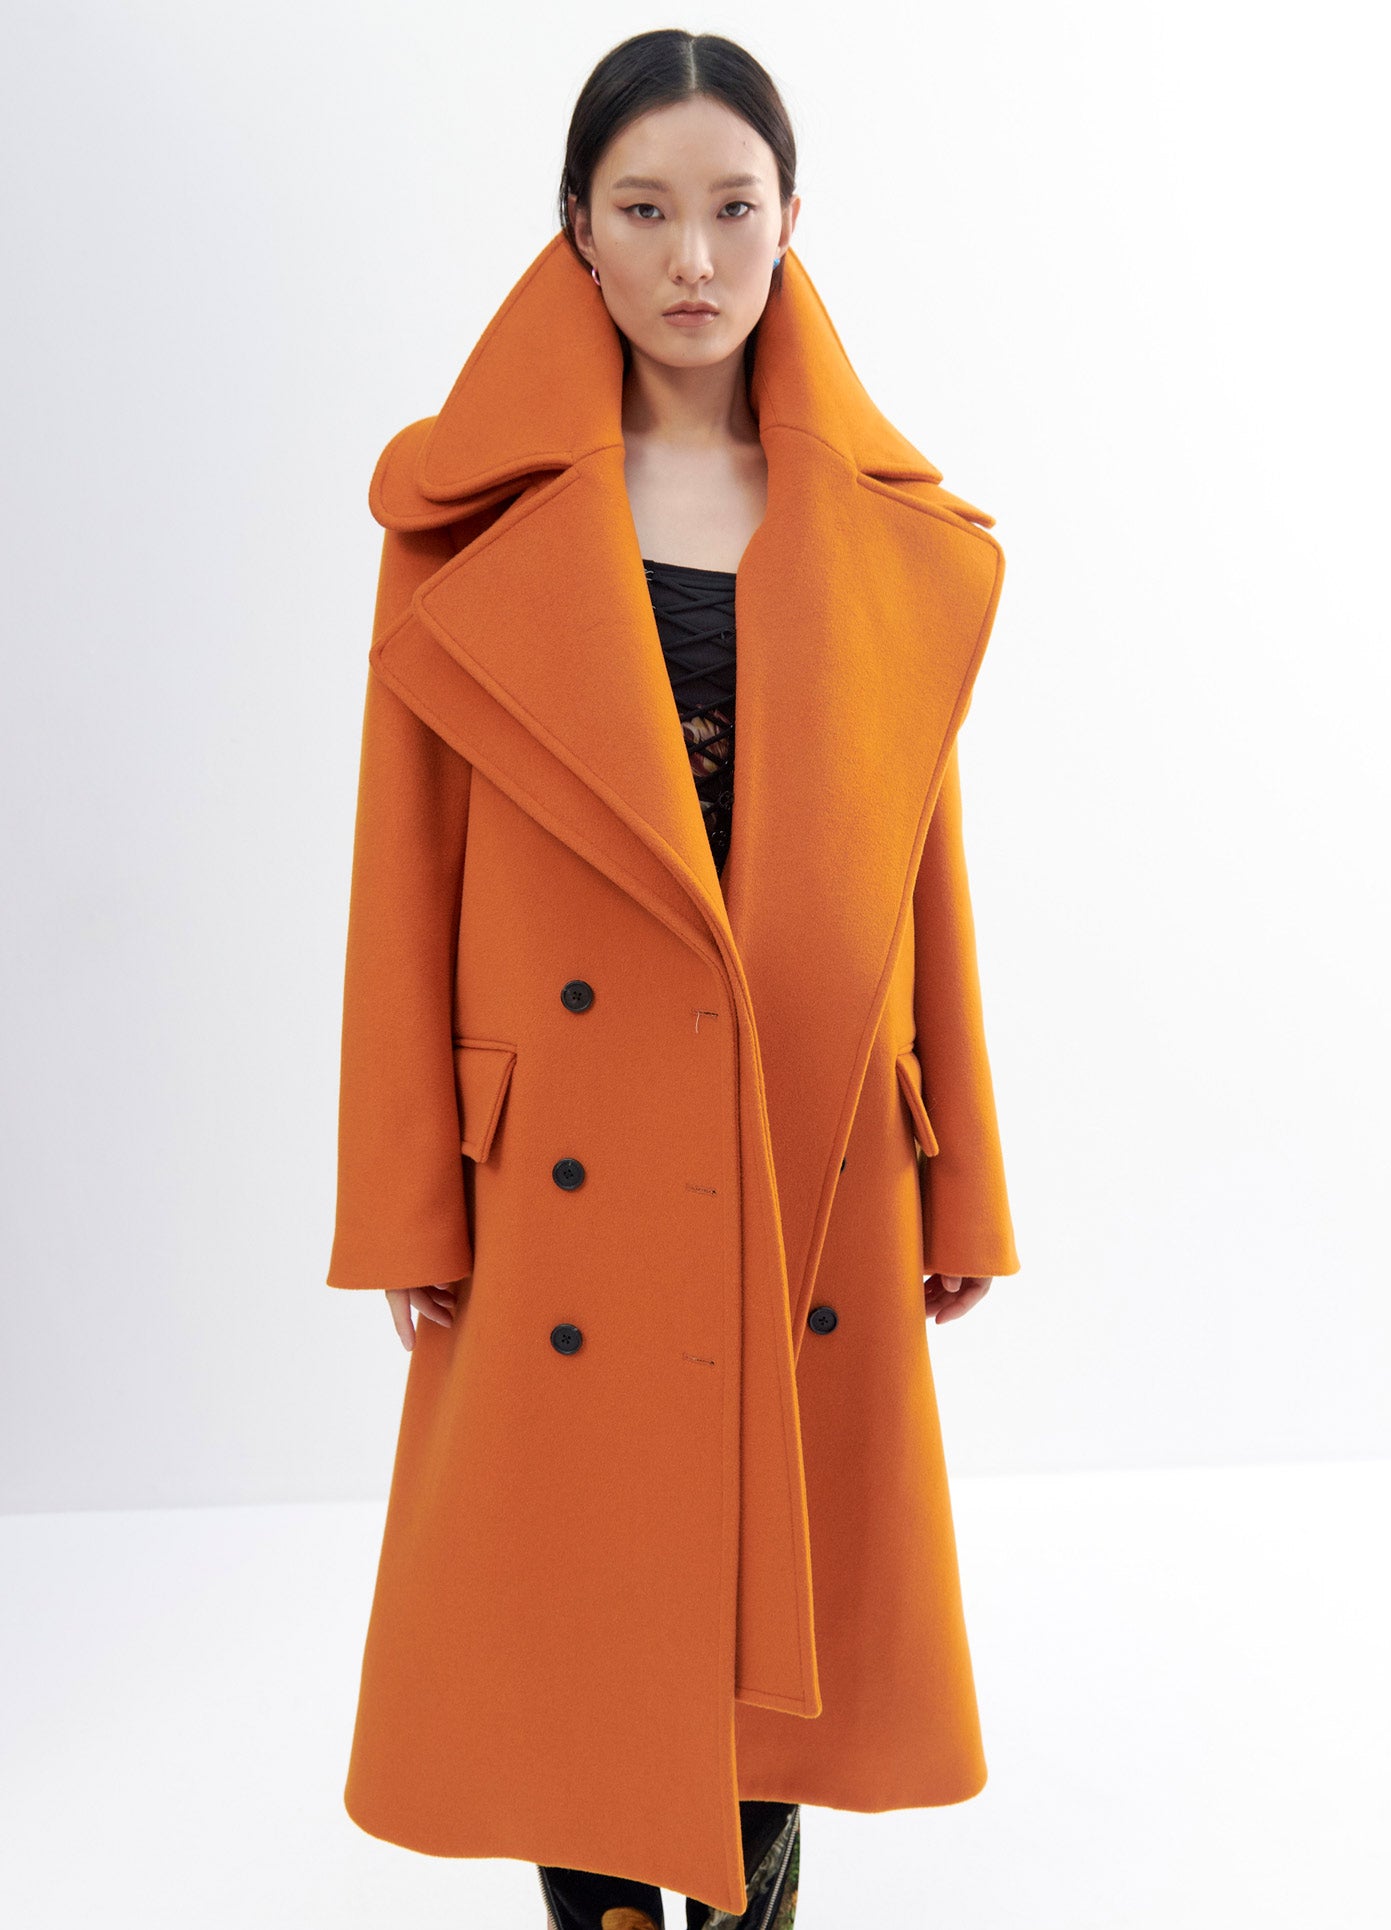 MONSE Double Collar Coat in Orange on Model Front View